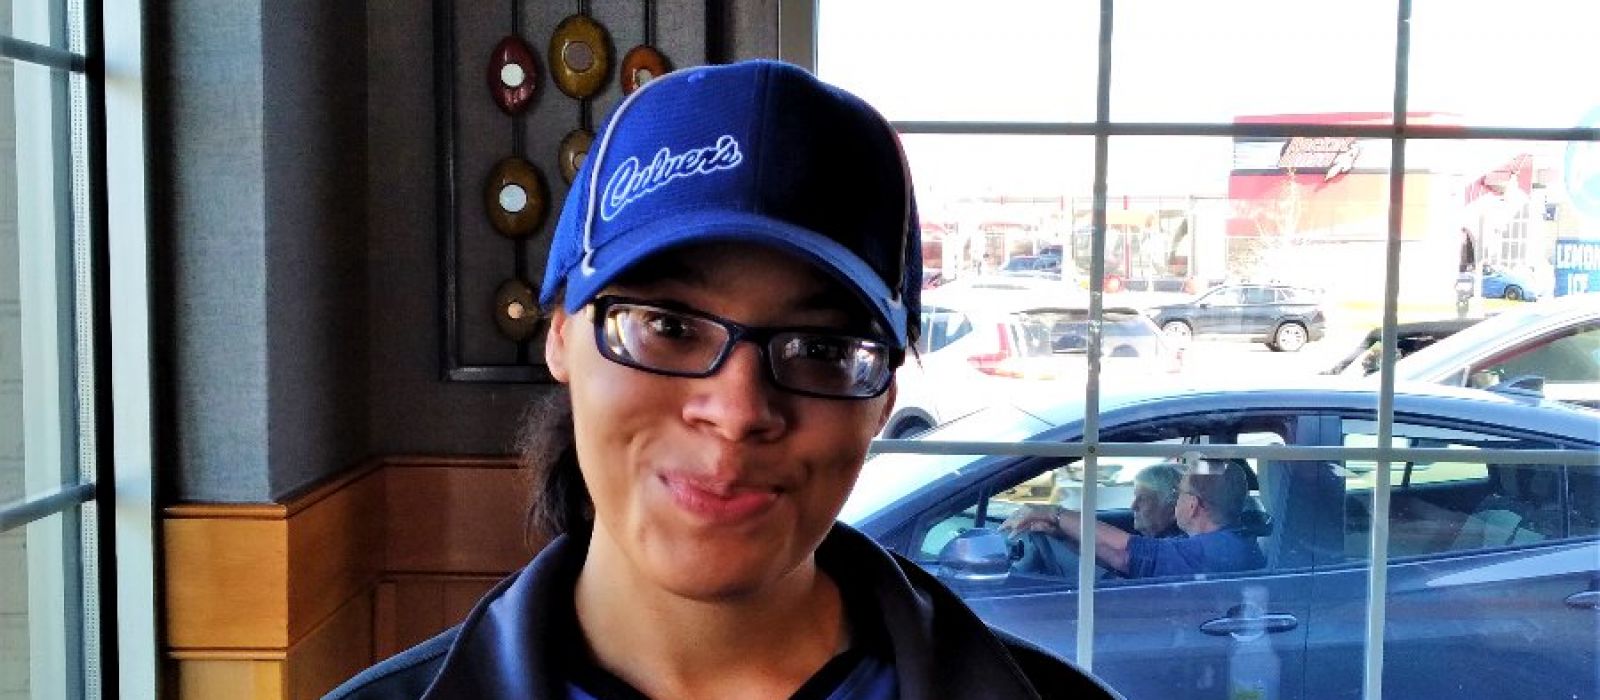 LCS Participant Working at Culver's